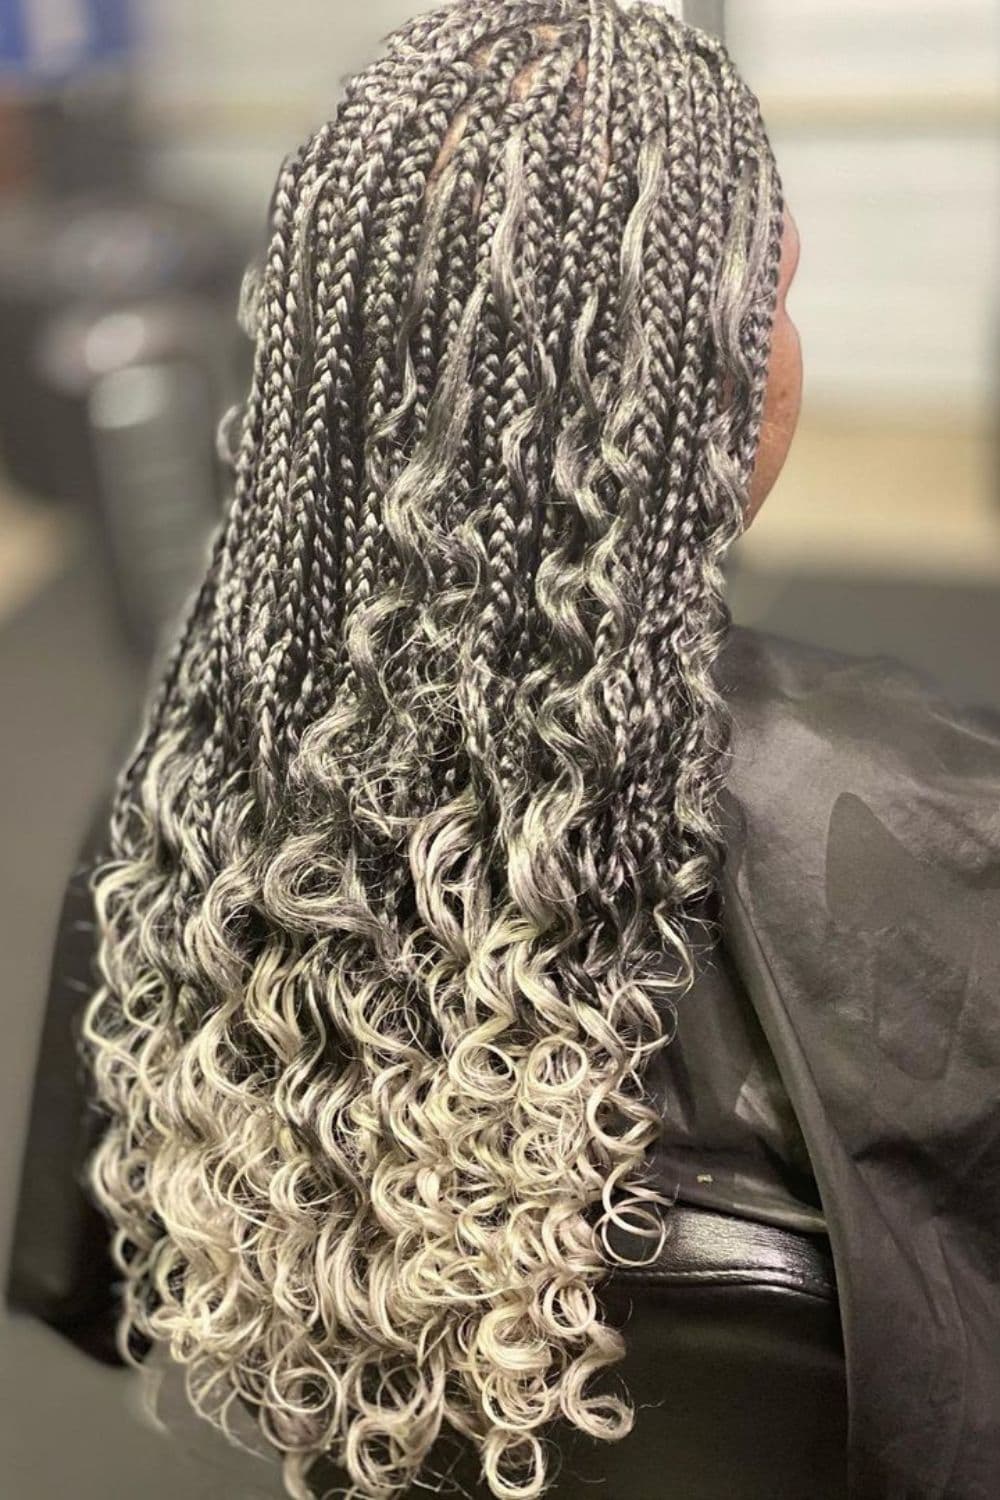 A woman with long gray goddess braids with curly ends.